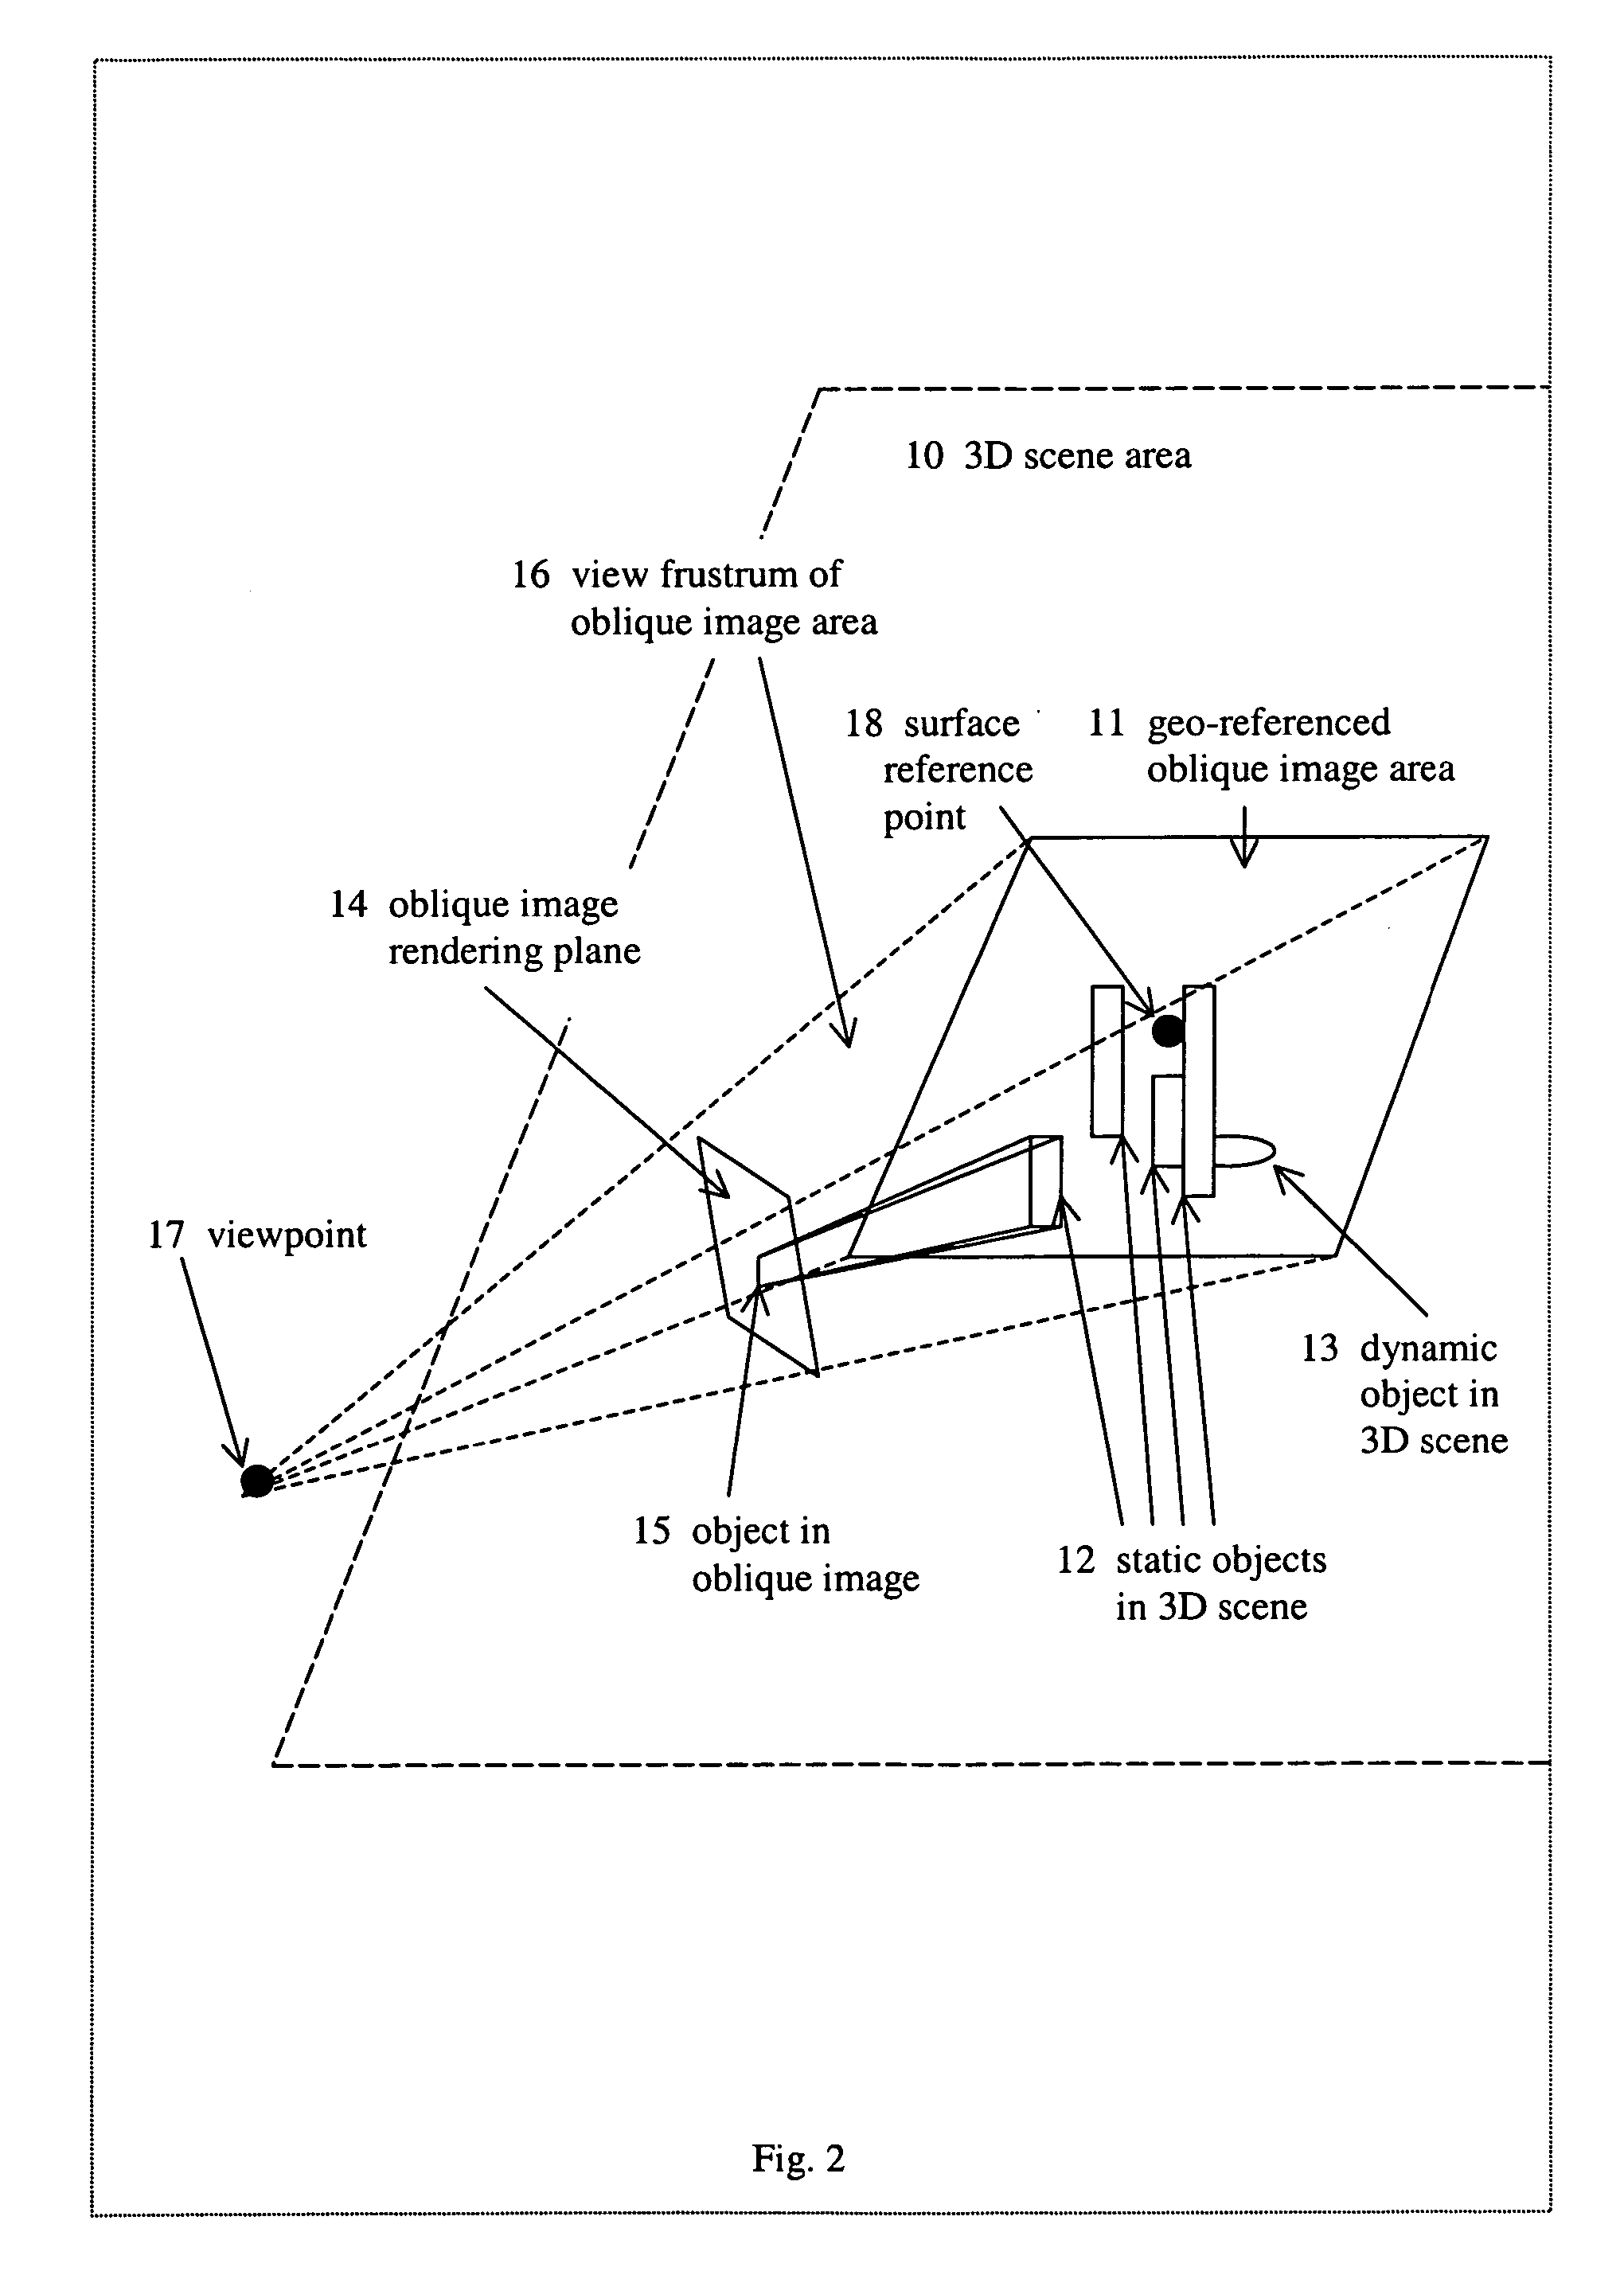 System for viewing a collection of oblique imagery in a three or four dimensional virtual scene